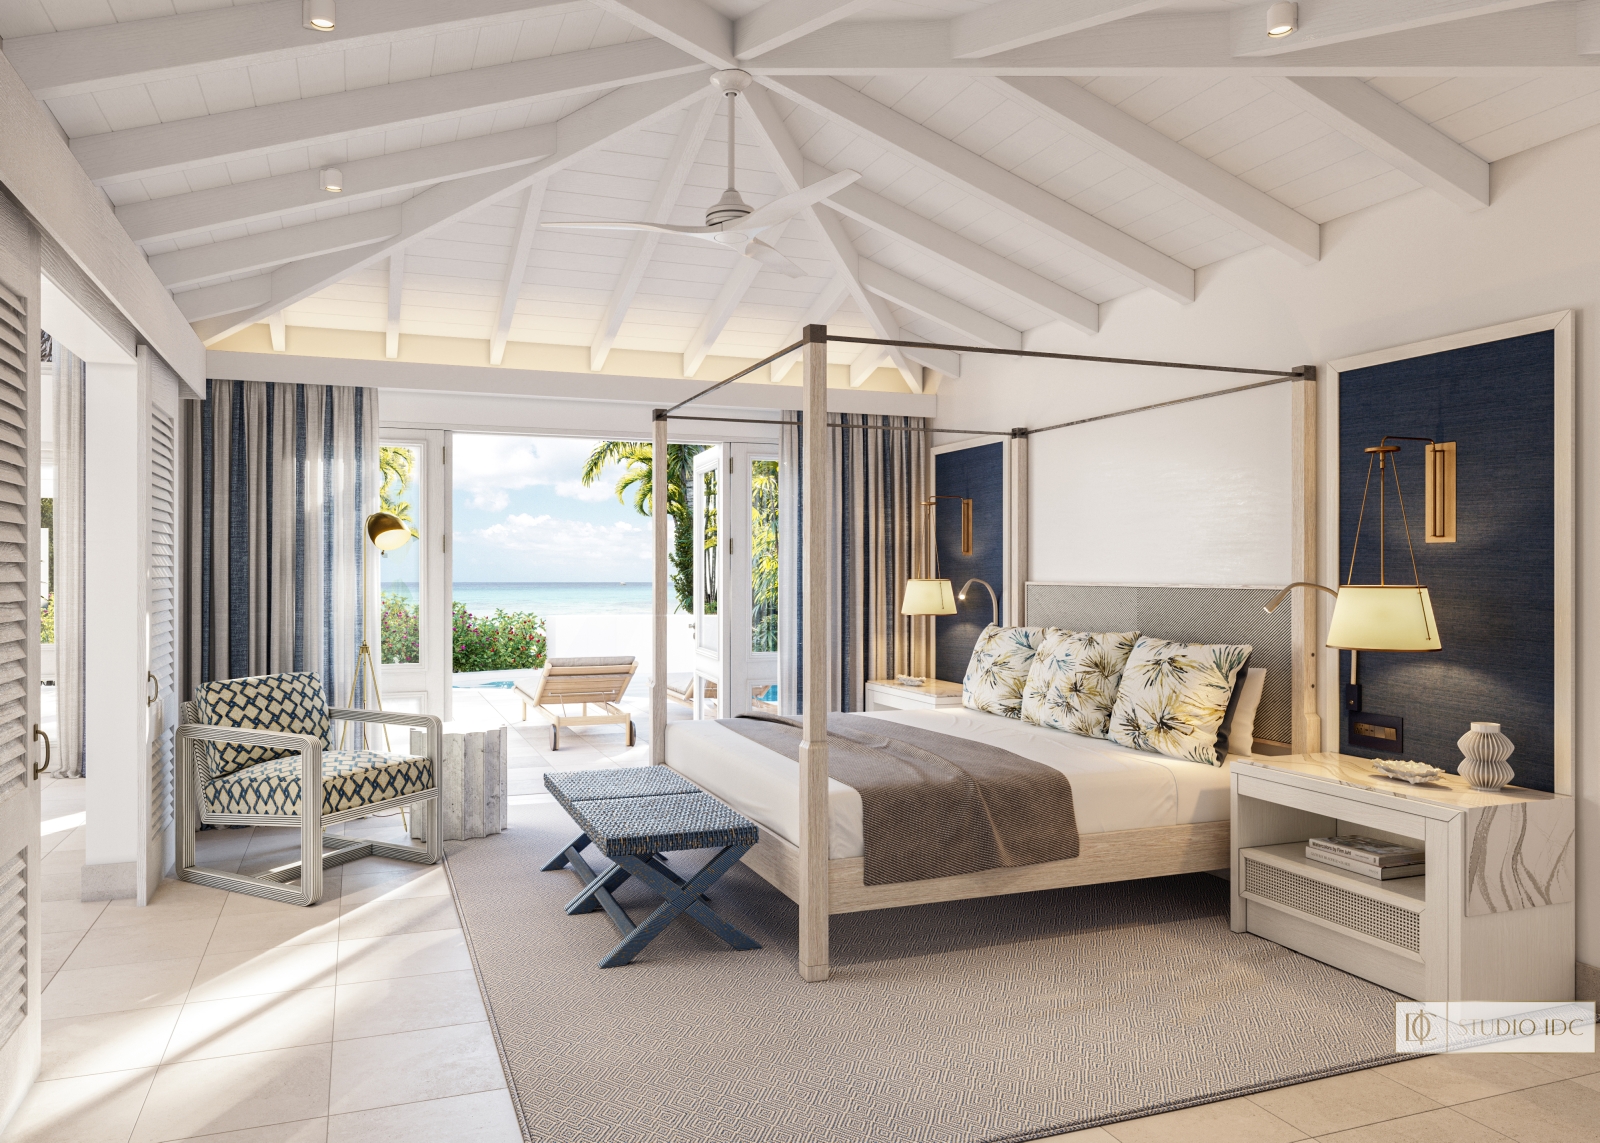 Bedroom with private terrace and pool at the beach